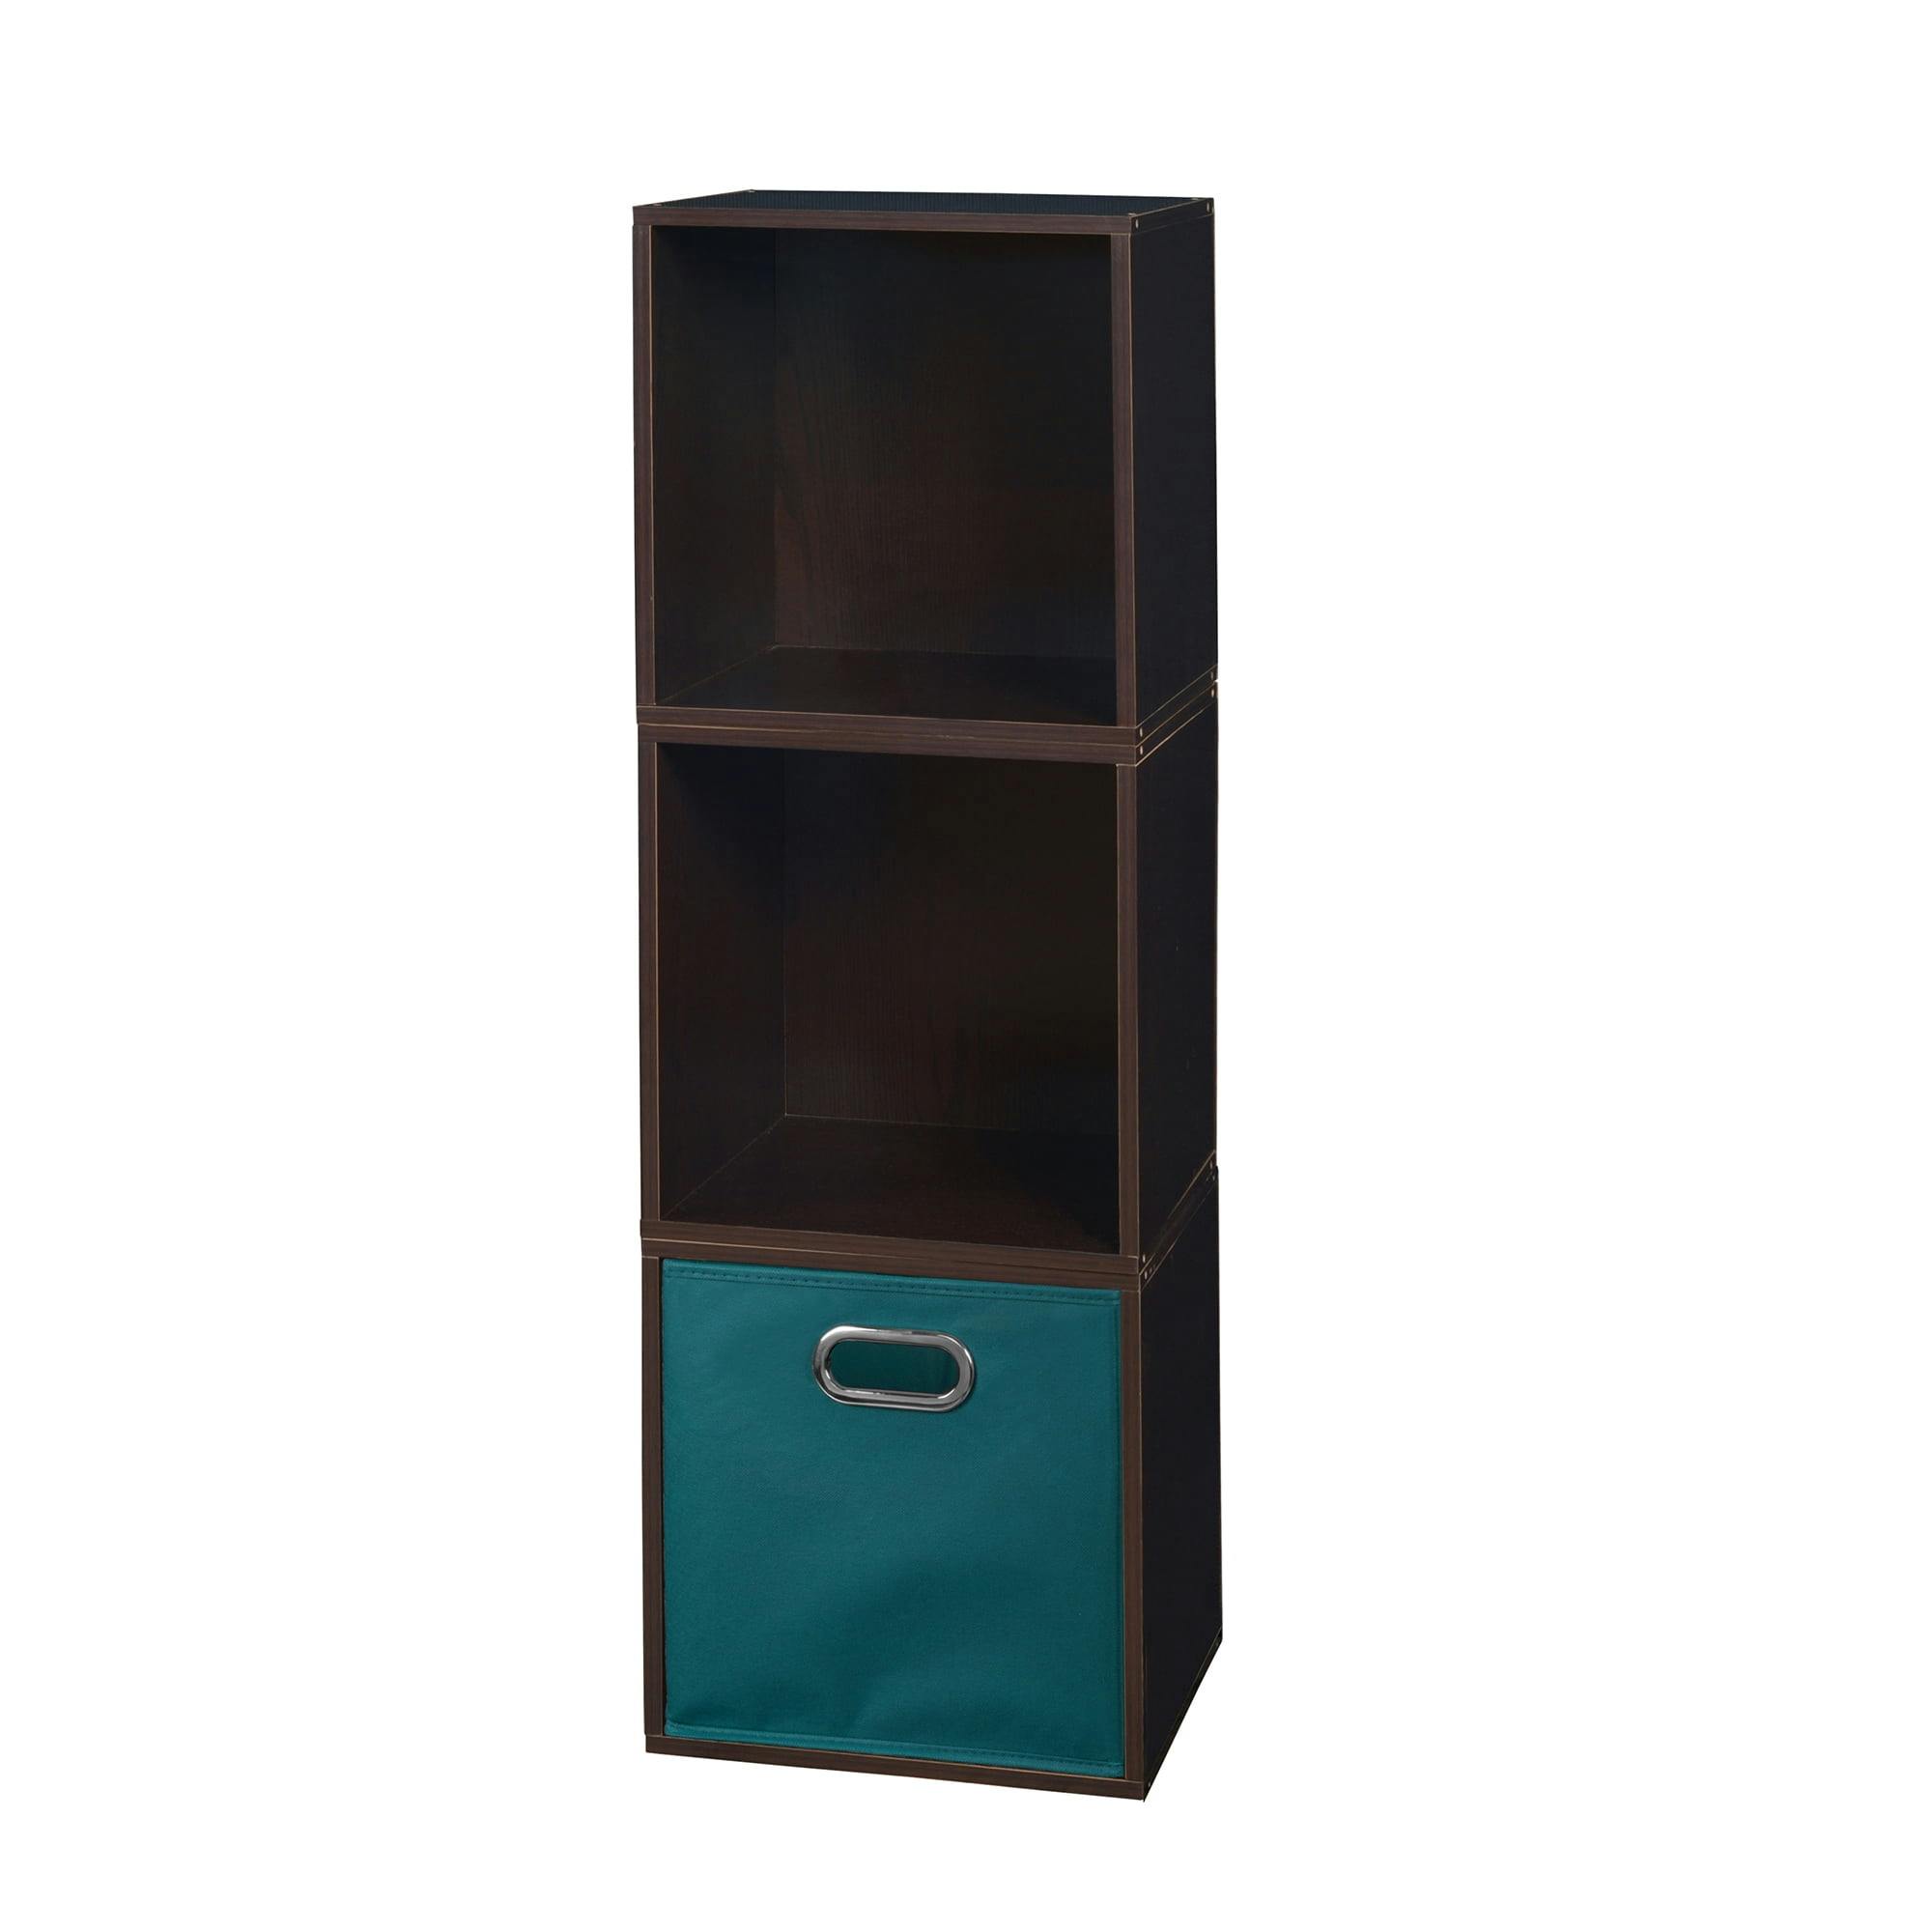 Truffle and Teal Stackable Kids Storage Cubes with Fabric Bin